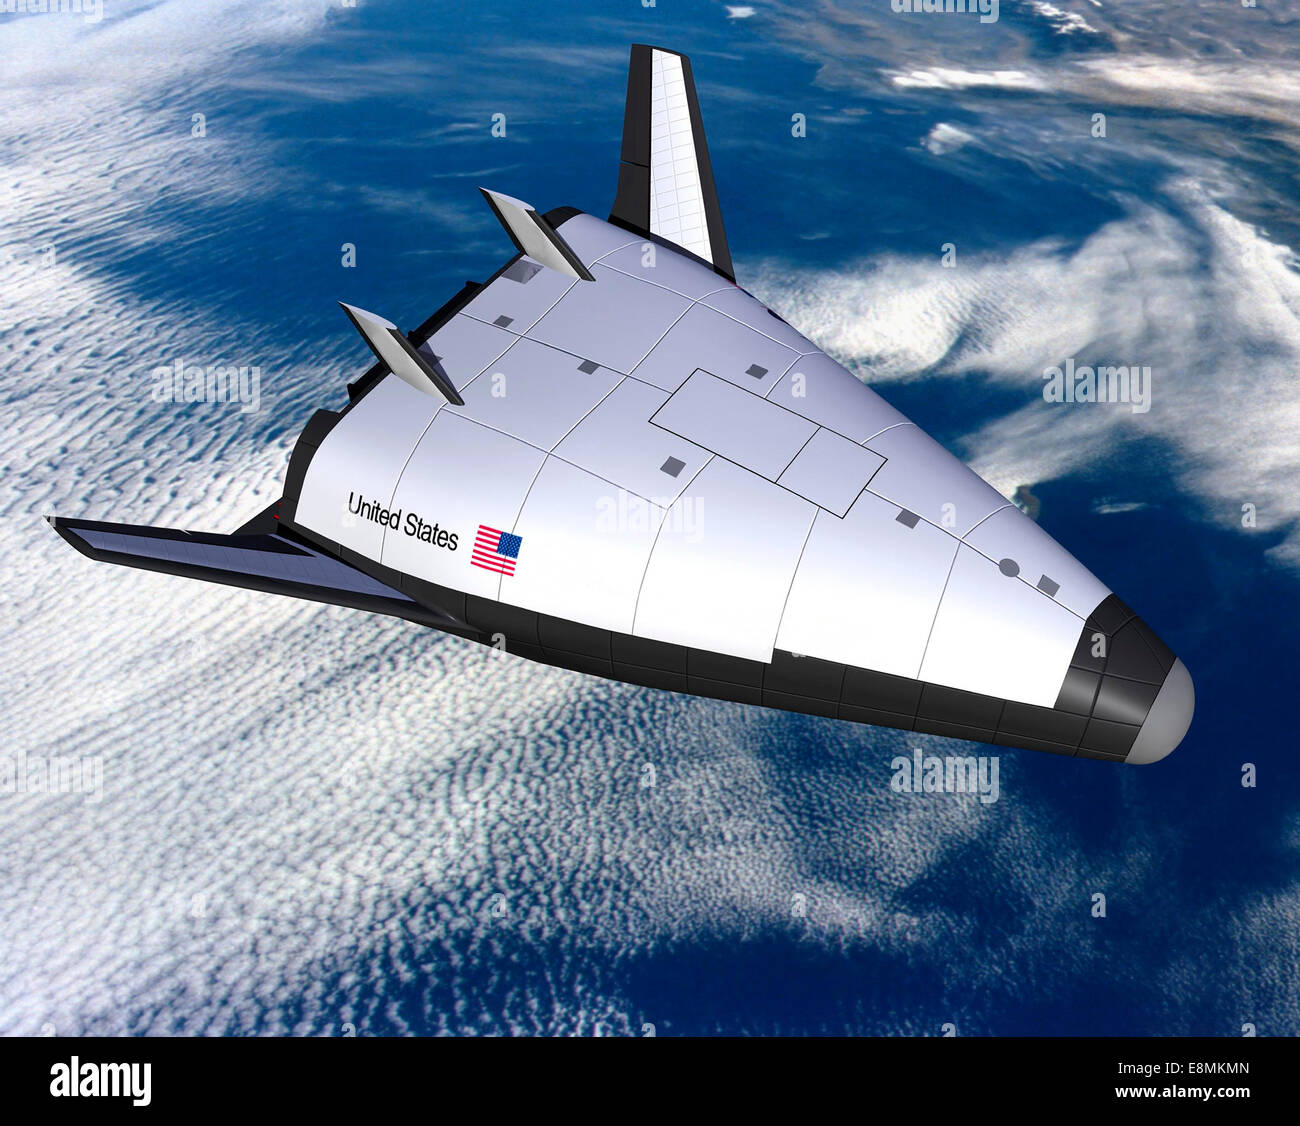 Artist's concept of the NASA/Lockheed Martin Single-Stage-To-Orbit (SSTO)  Reusable Launch Vehicle (RLV) in orbit high above the Stock Photo - Alamy